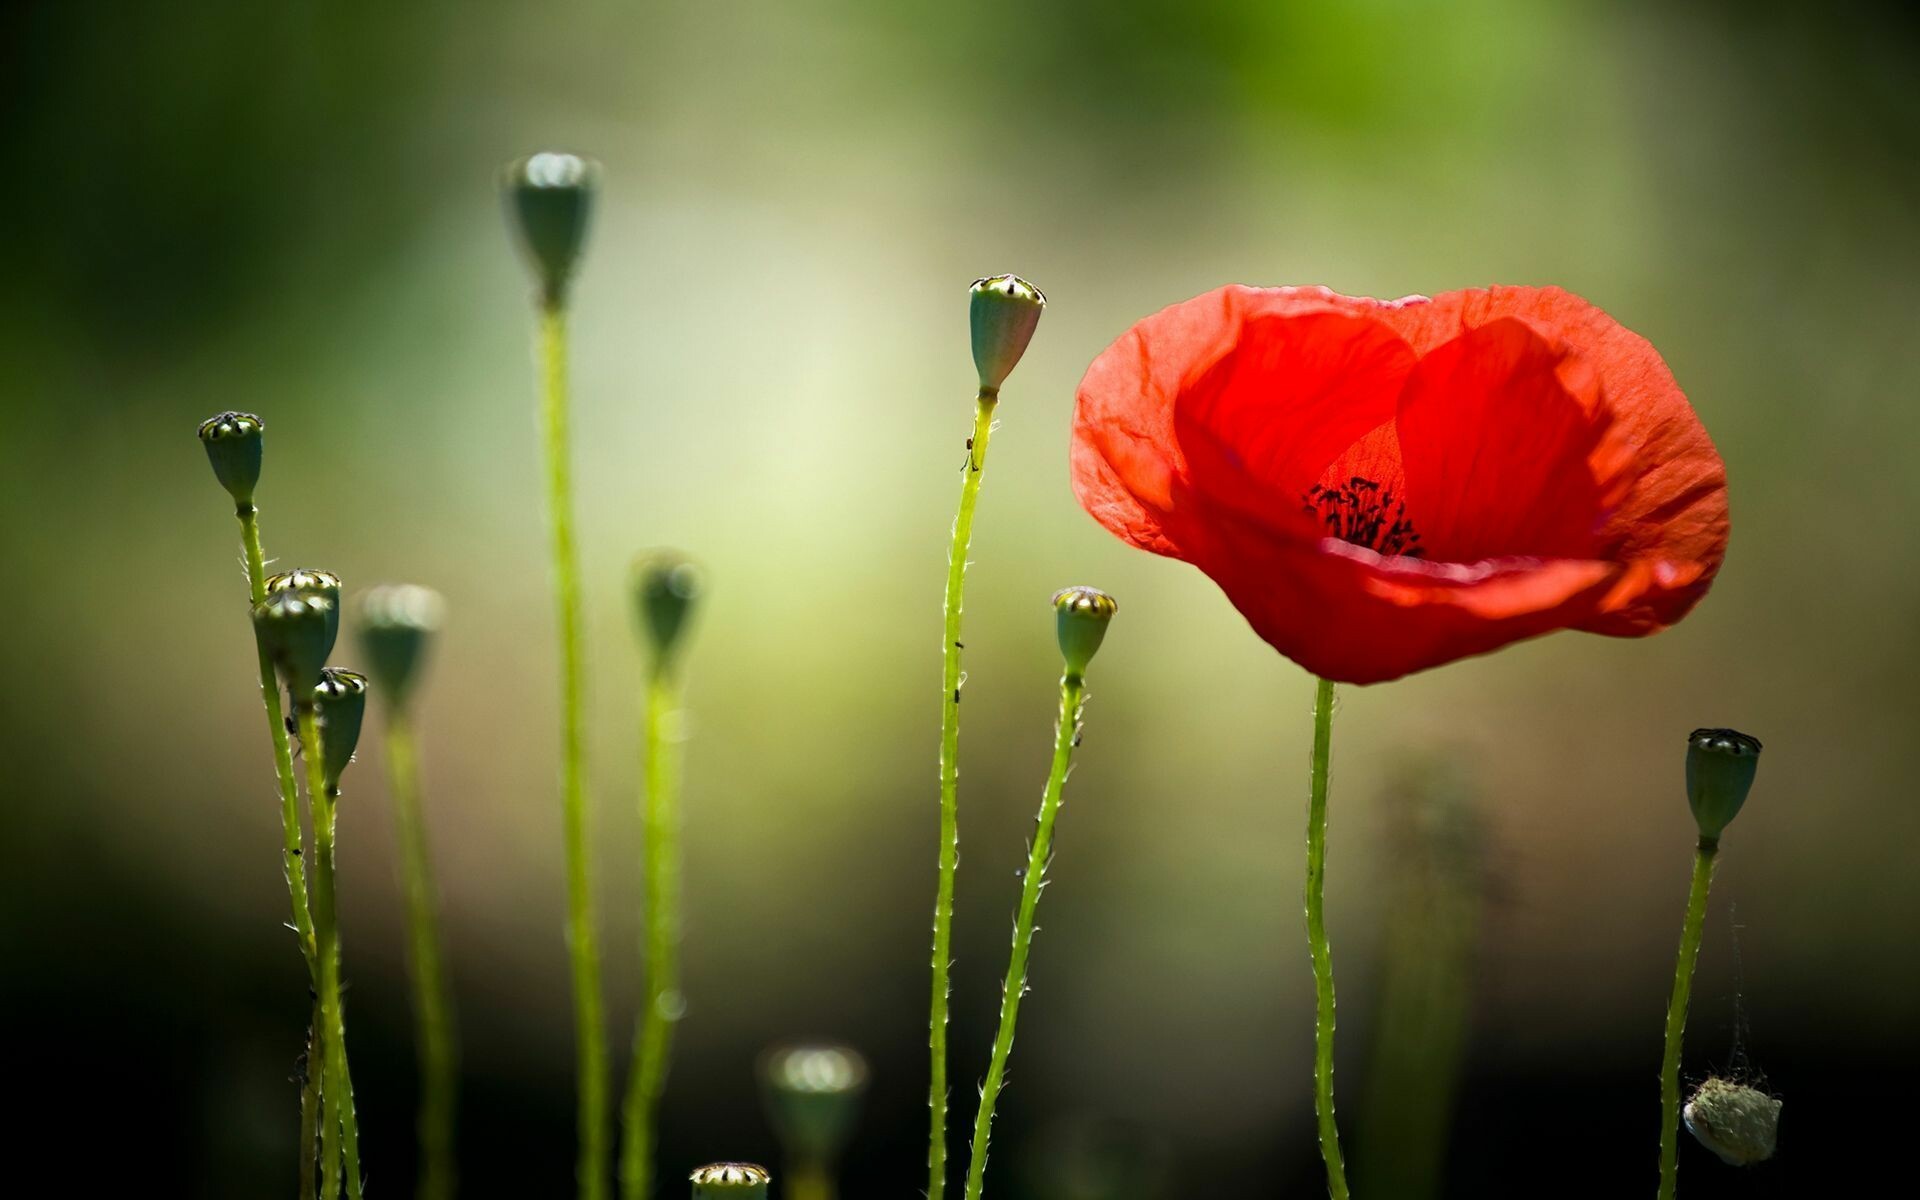 Poppy Flower: An annual or overwintering weed native to arable land, roadsides, waste places, and other disturbed habitats. 1920x1200 HD Wallpaper.